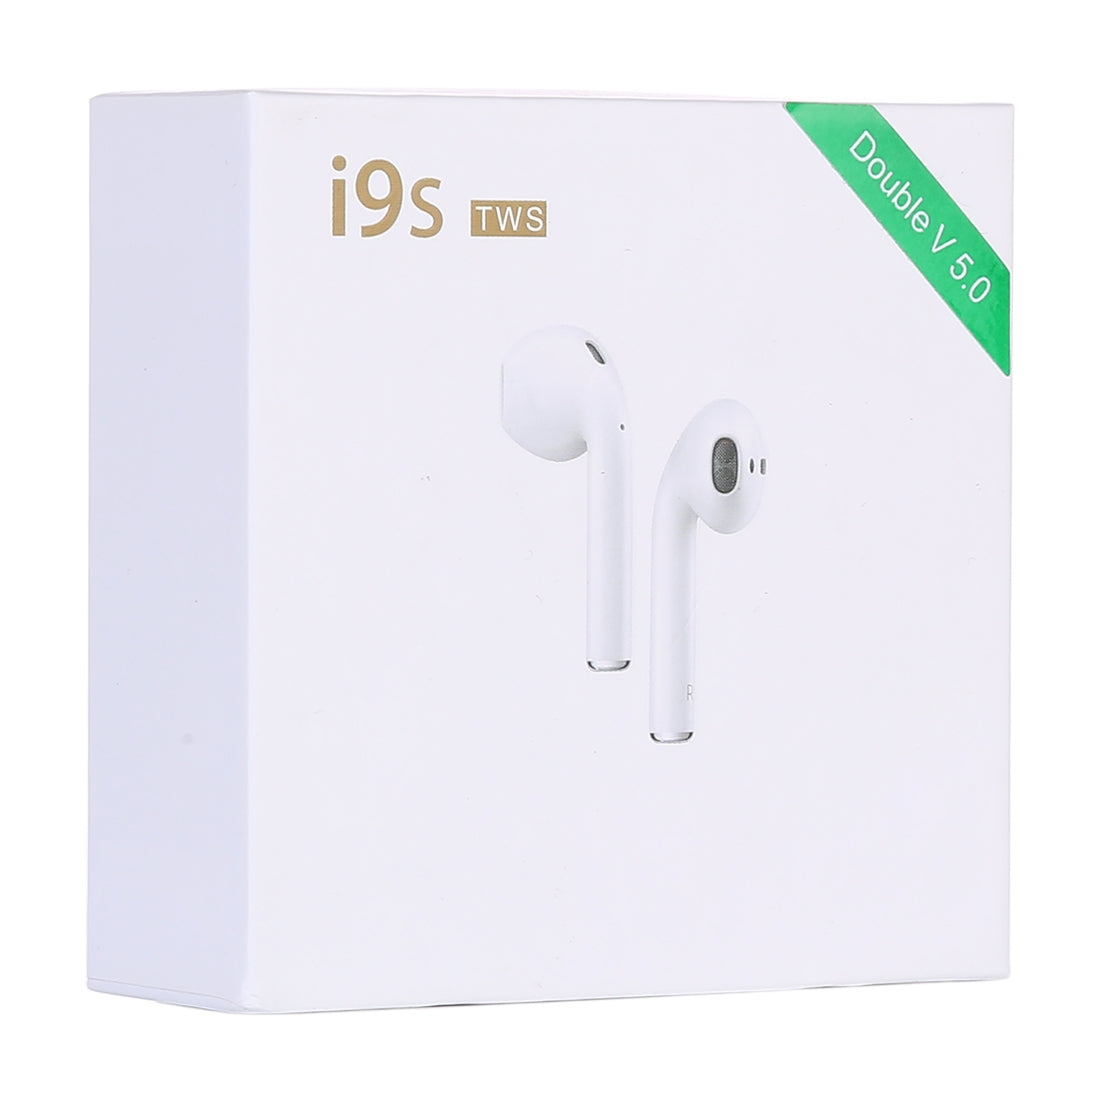 i9S-TWS Bluetooth V5.0 Wireless Stereo Earphones with Magnetic Charging Box, Compatible with iOS & Android(Blue)